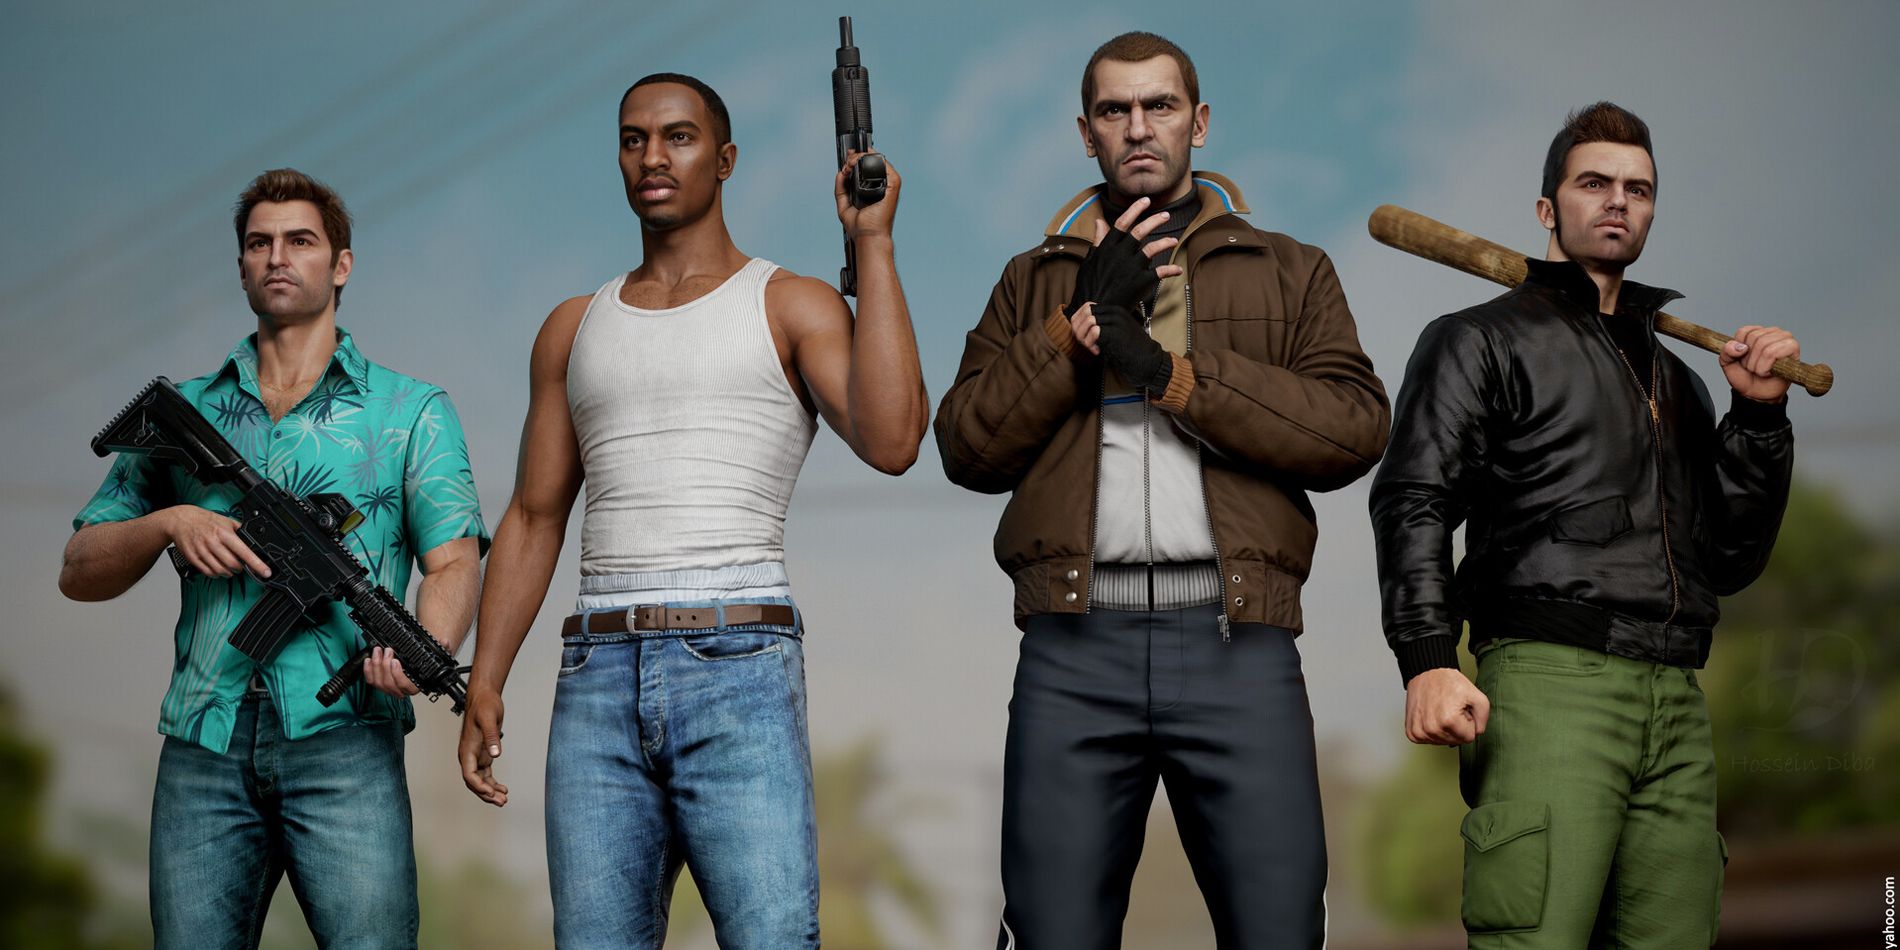 Classic GTA protagonists get modern 3D Makeover by artist